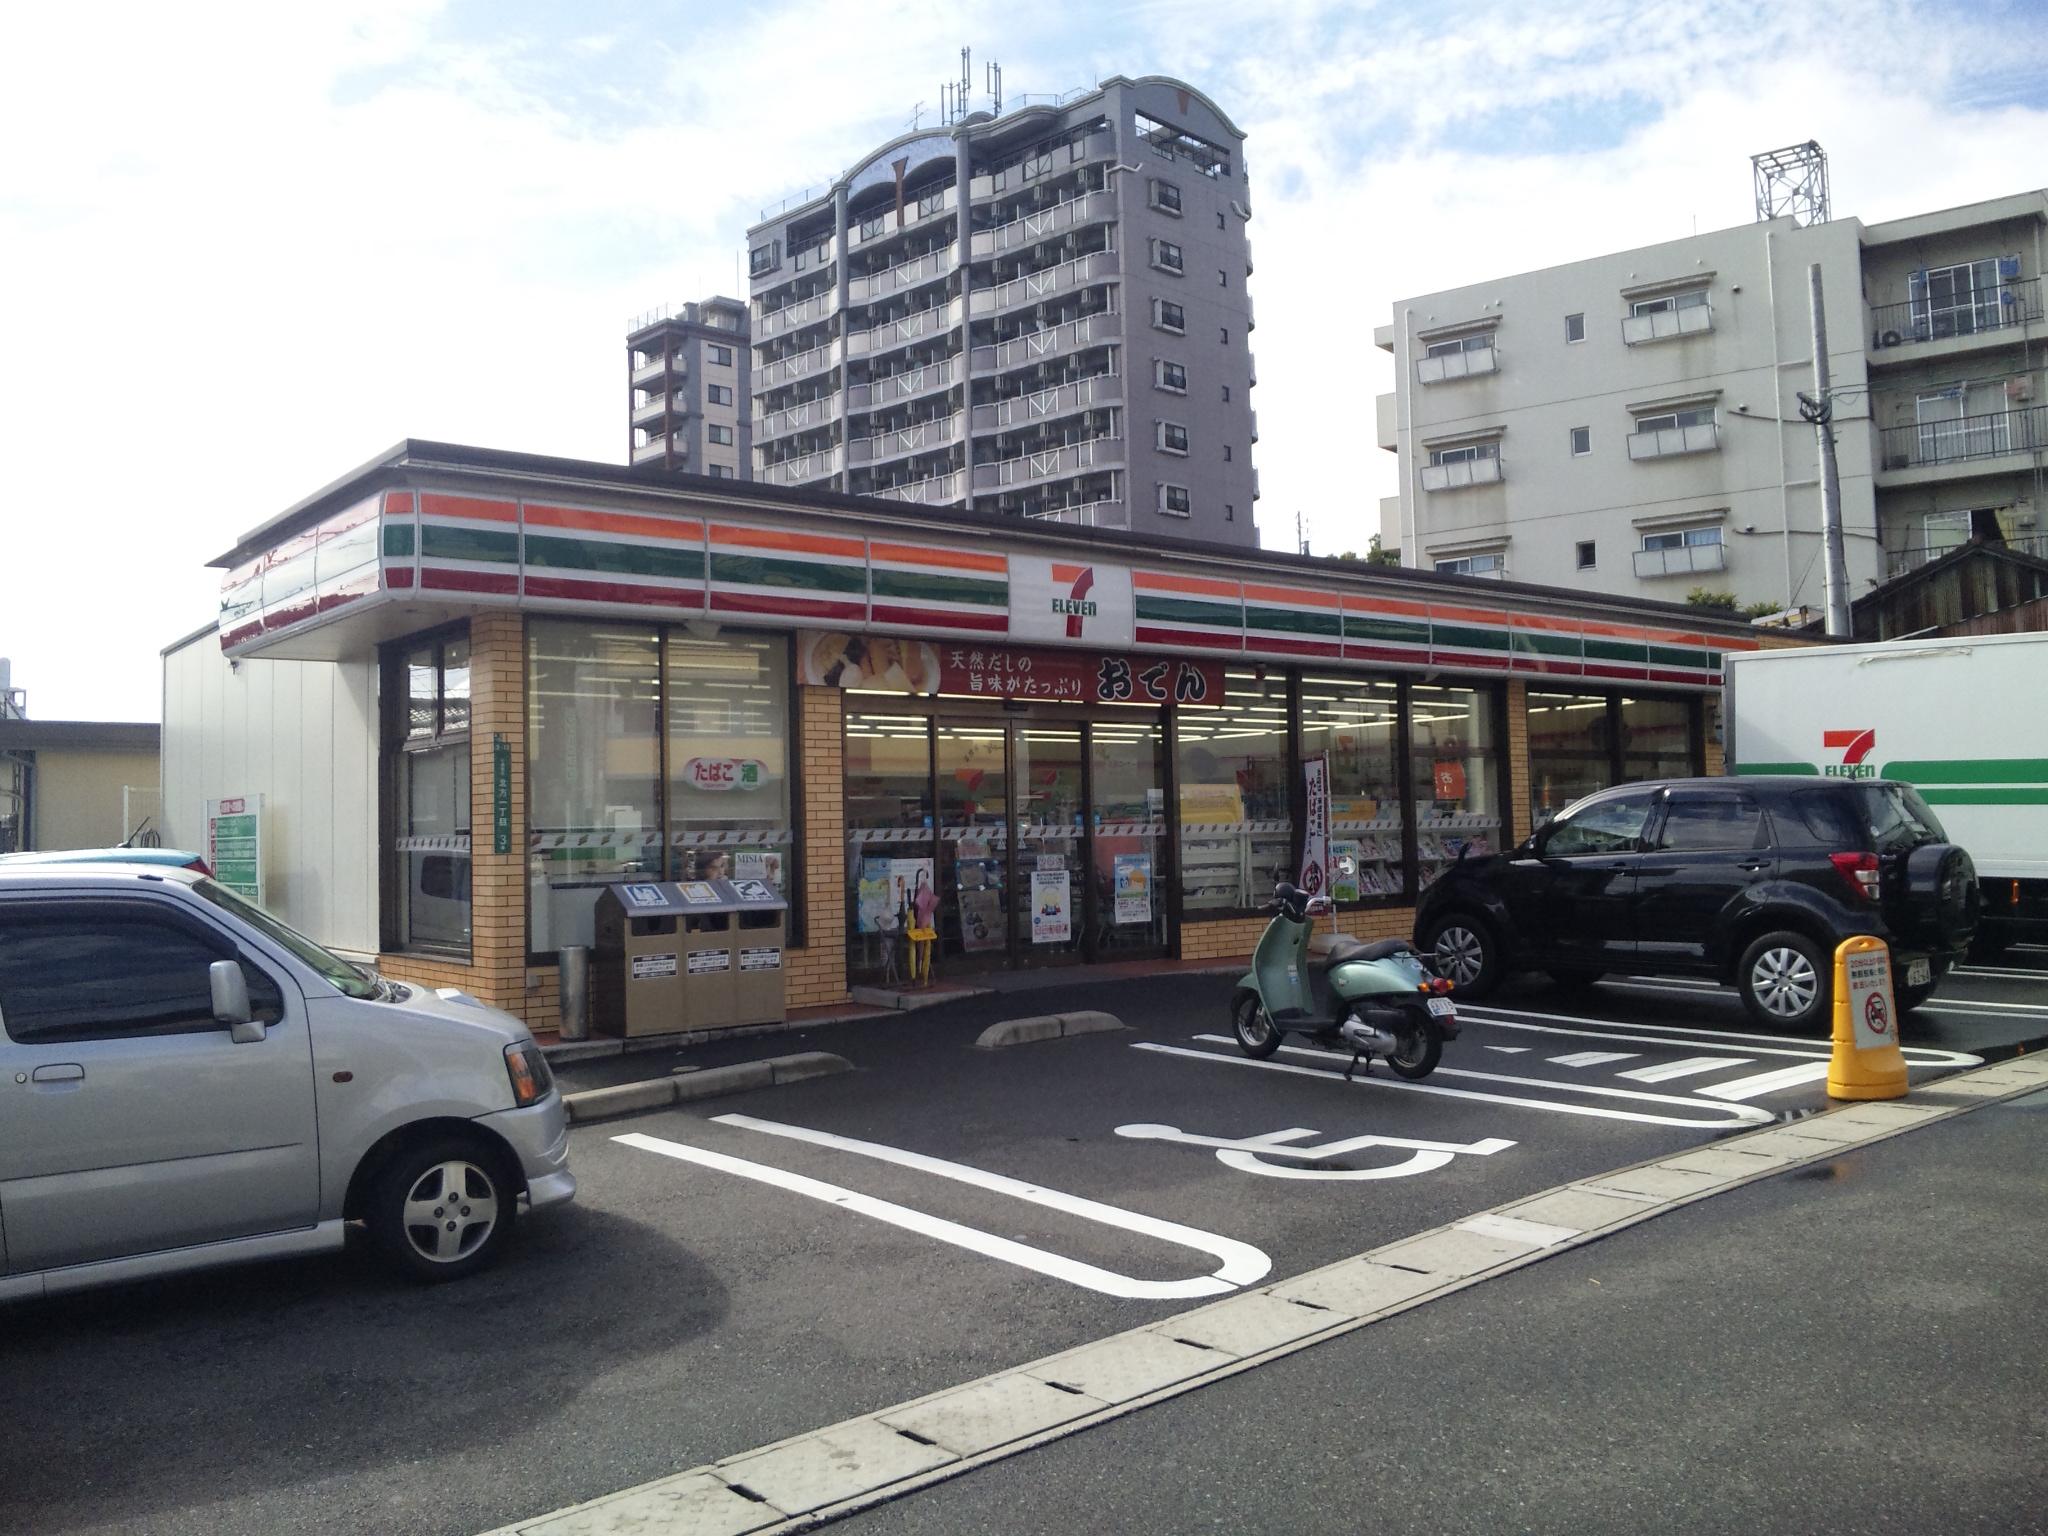 Convenience store. Seven-Eleven Kokura how 1-chome to (convenience store) 606m